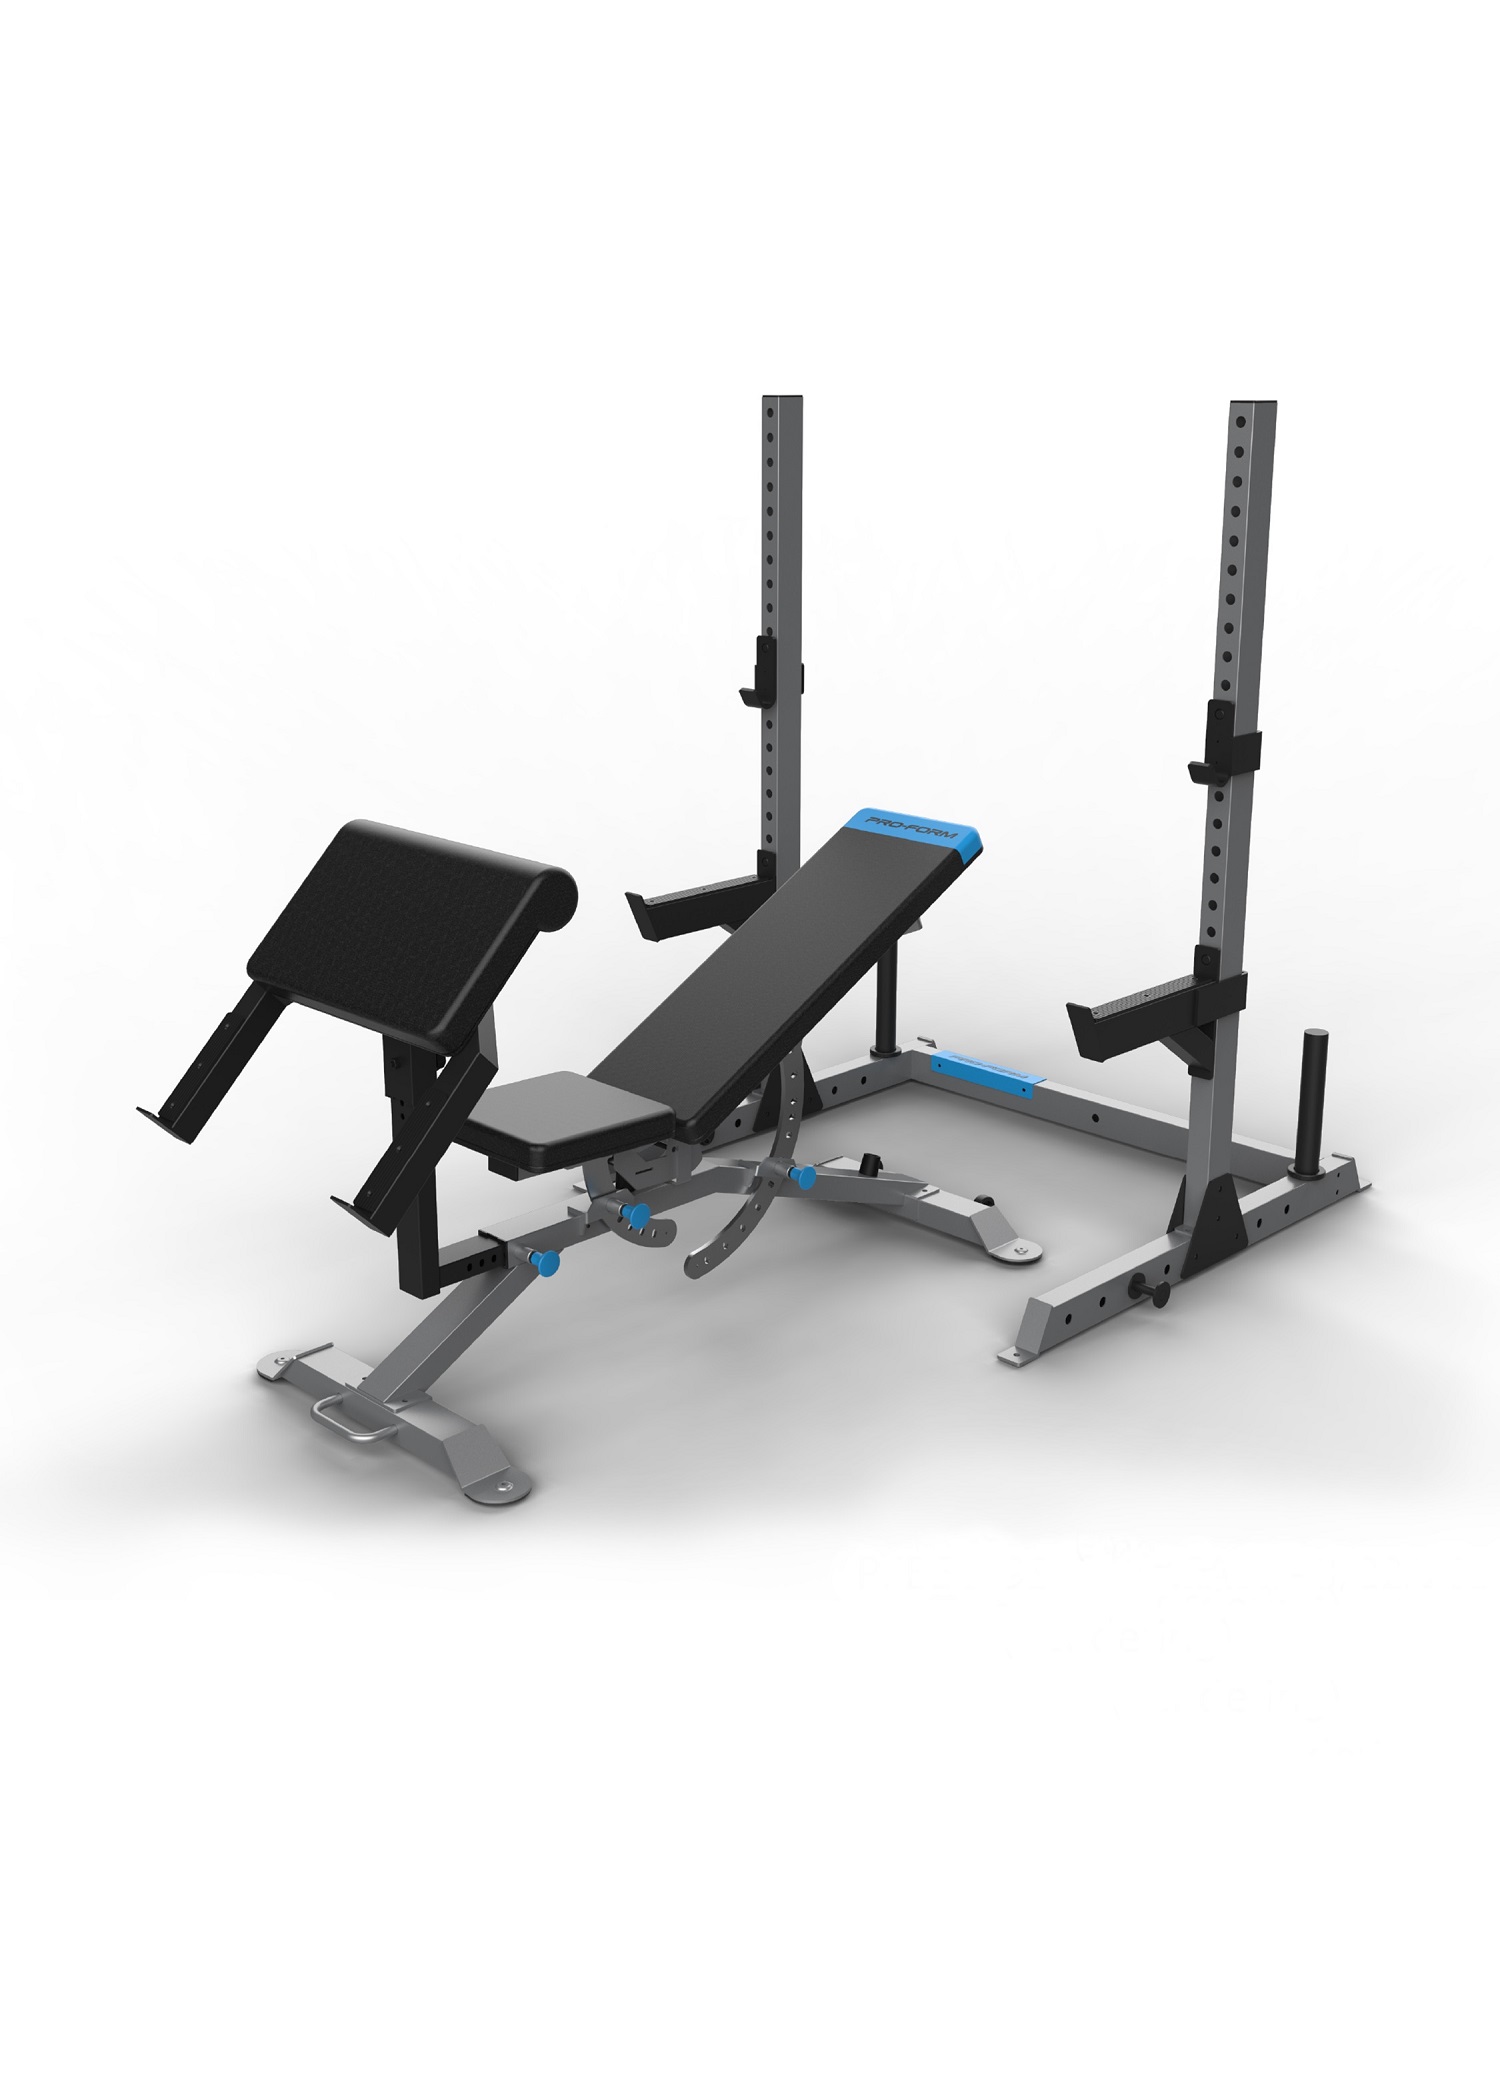 Utility Bench With rack